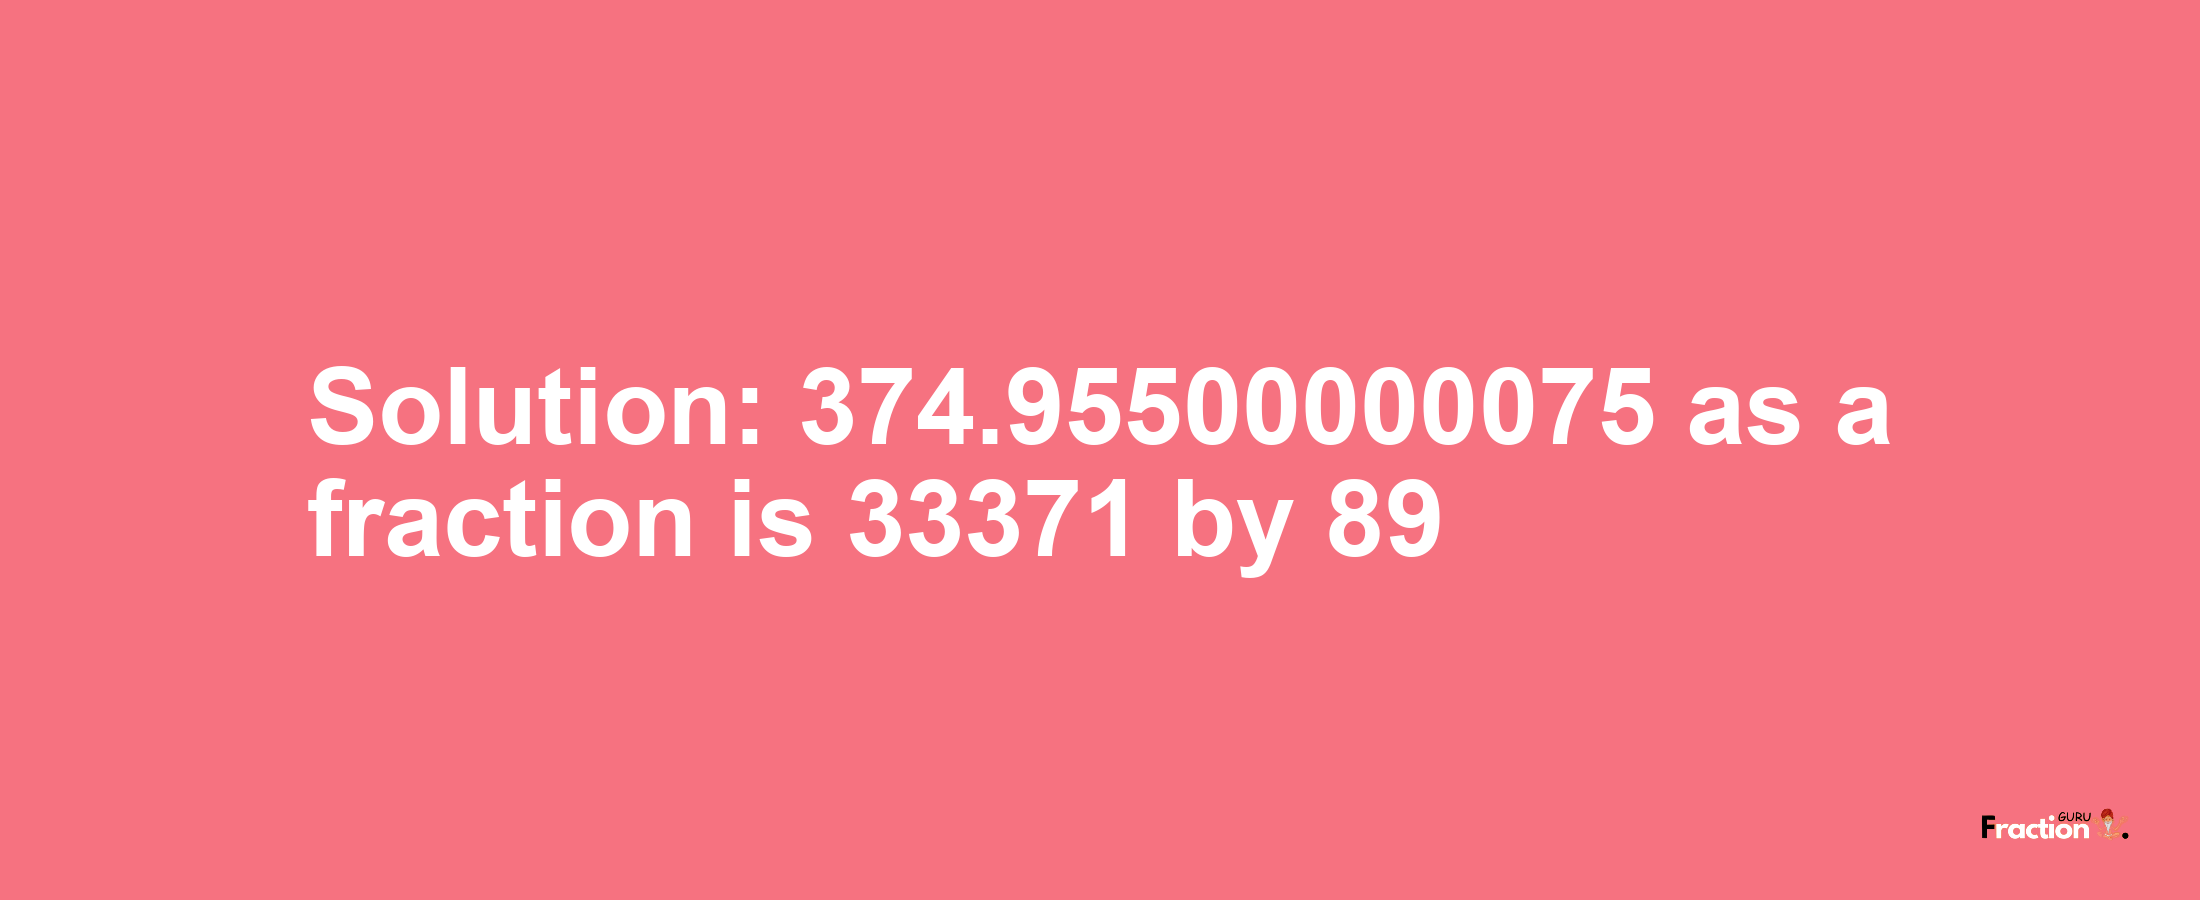 Solution:374.95500000075 as a fraction is 33371/89